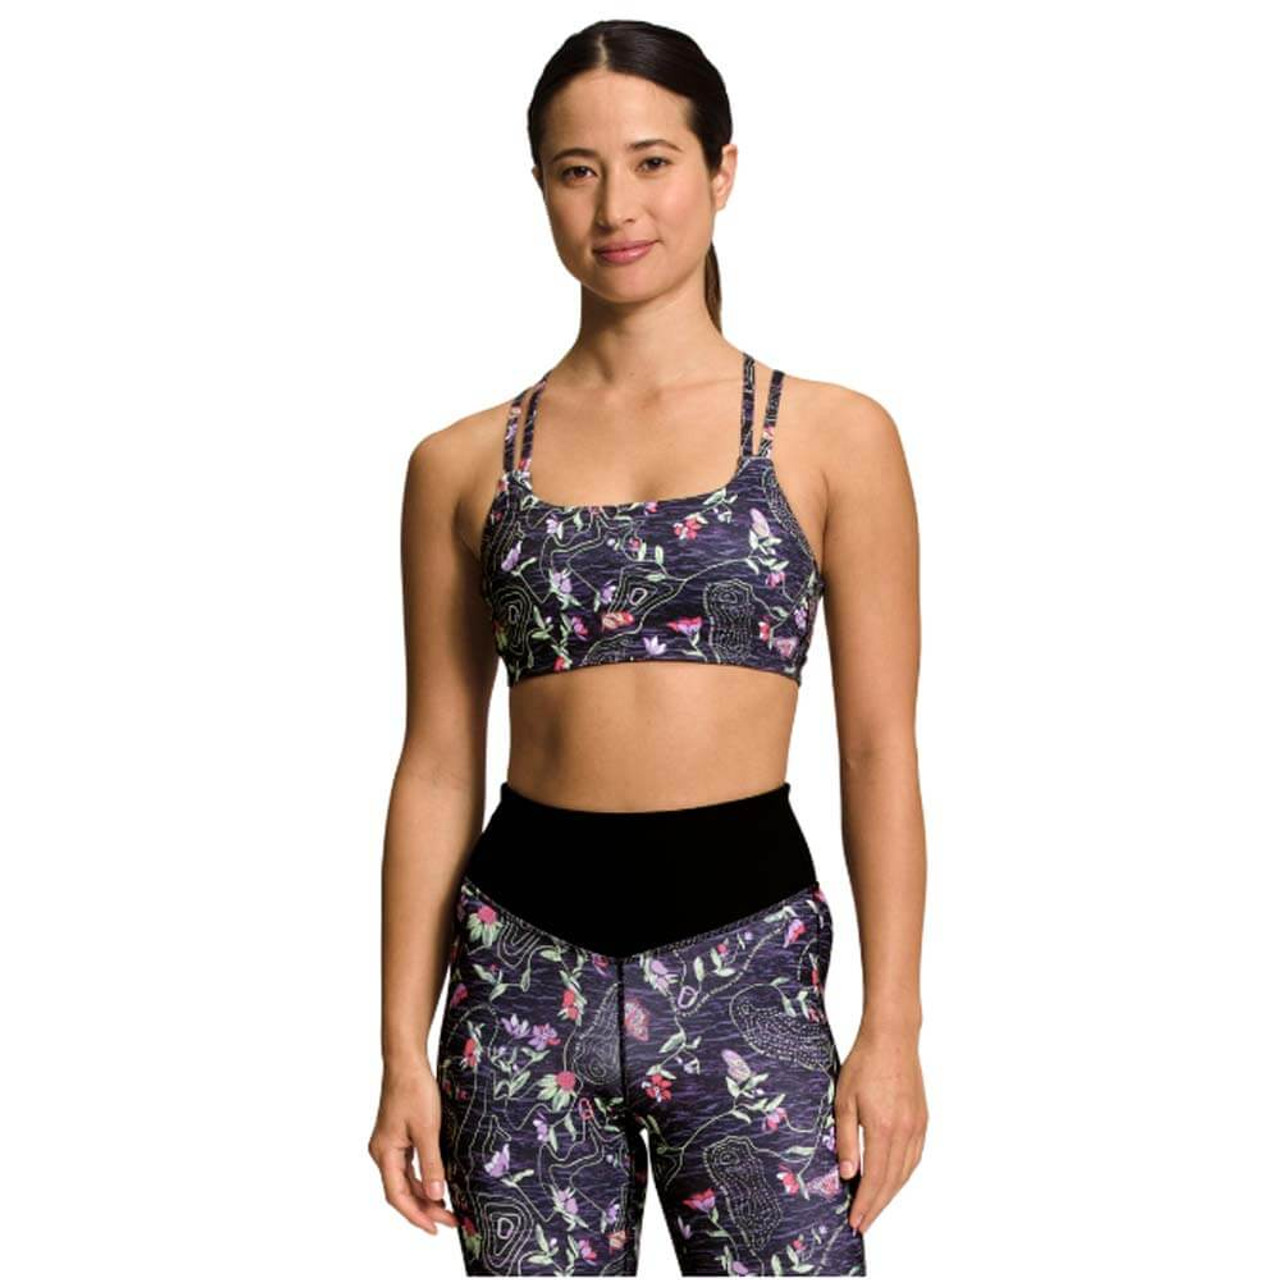 https://cdn11.bigcommerce.com/s-zut1msomd6/images/stencil/1280x1280/products/36221/245463/womens-the-north-face-dune-sky-strappy-bra-NF0A7WZP-IAY-main__78306.1703784821.jpg?c=1